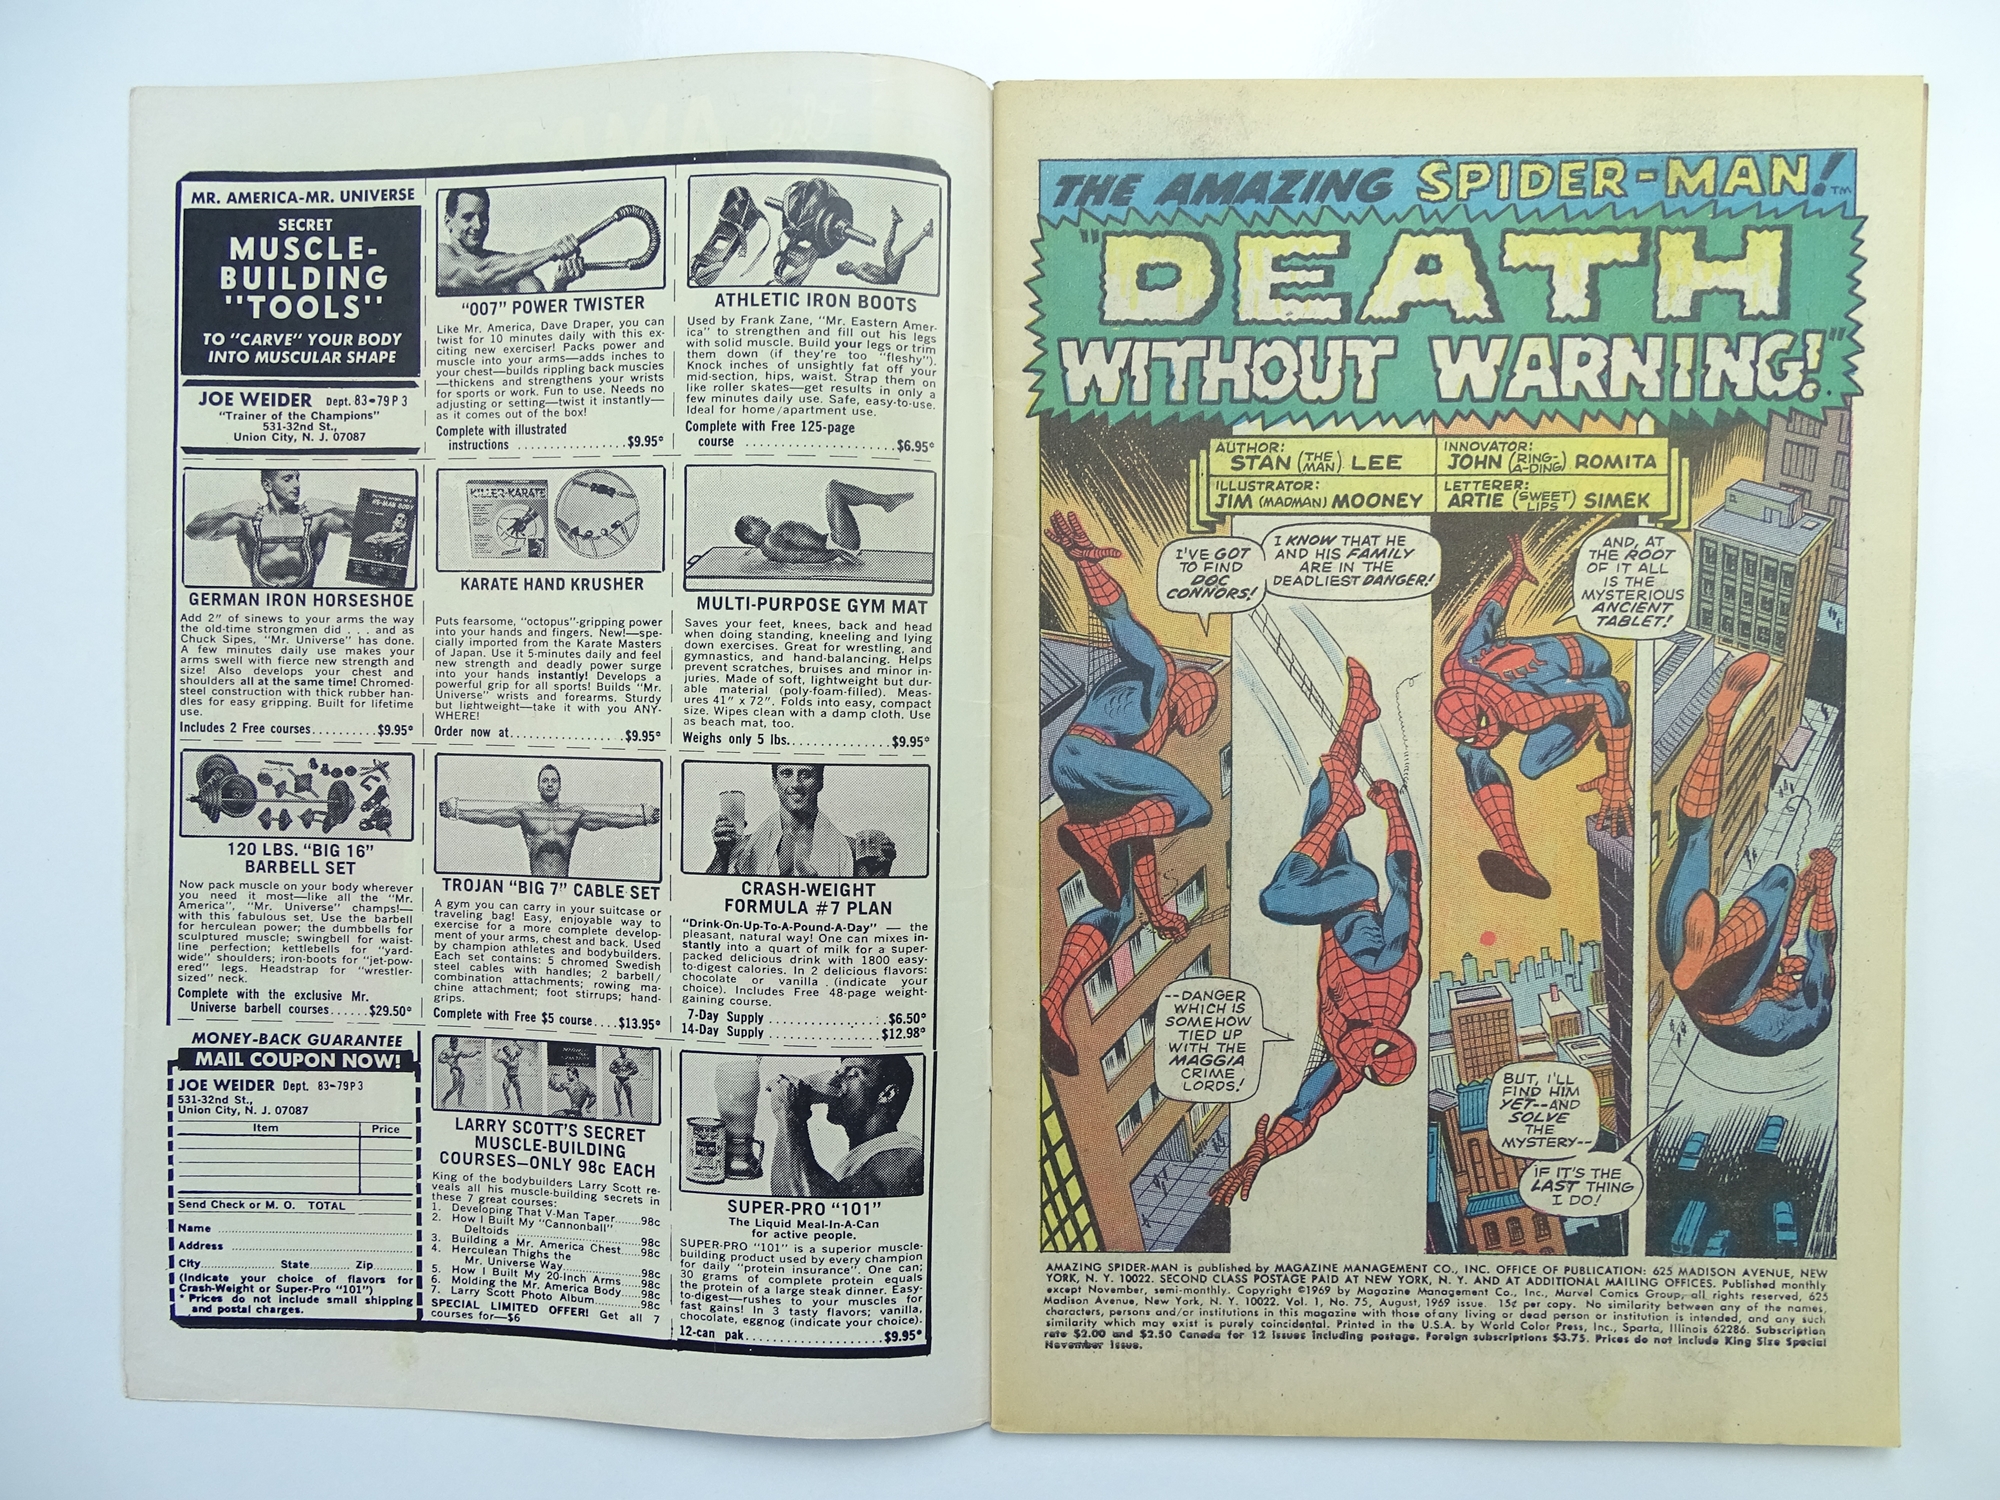 AMAZING SPIDER-MAN # 75 - (1969 - MARVEL - Cents Copy) - 'Death' of Silvermane + Lizard cameo - John - Image 3 of 7